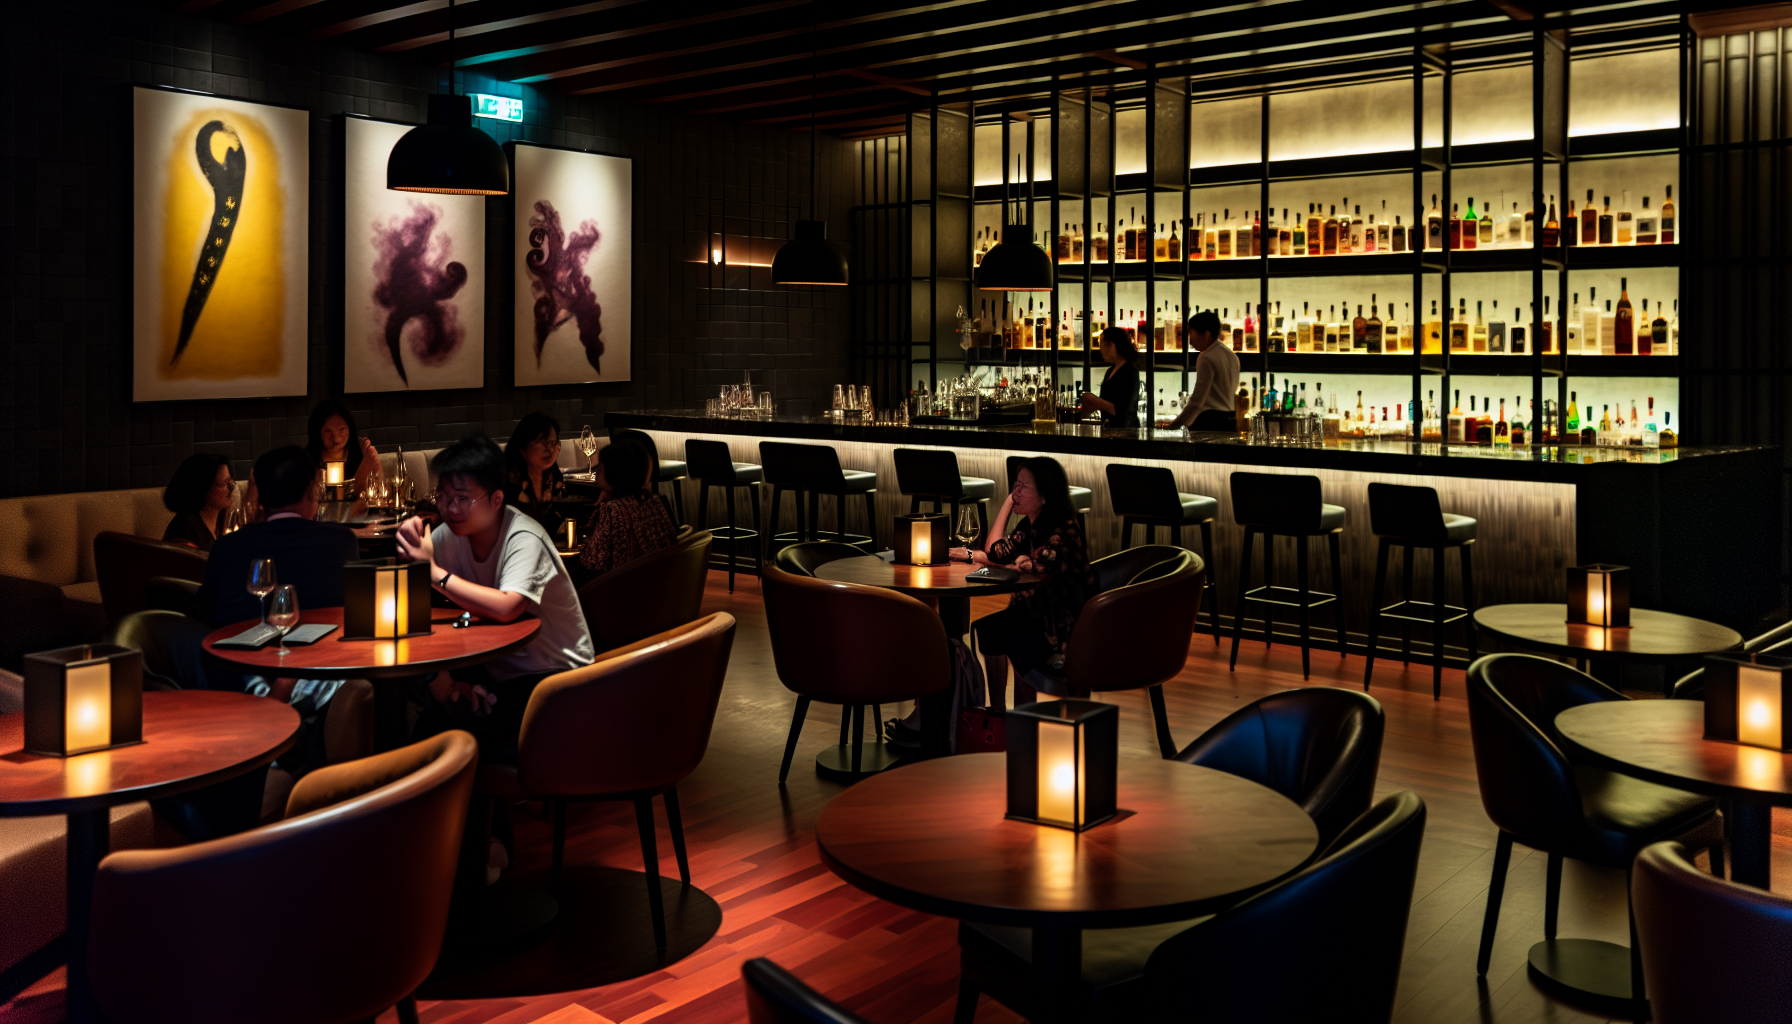 Ambient restaurant lighting with dimmed lighting and accent lighting